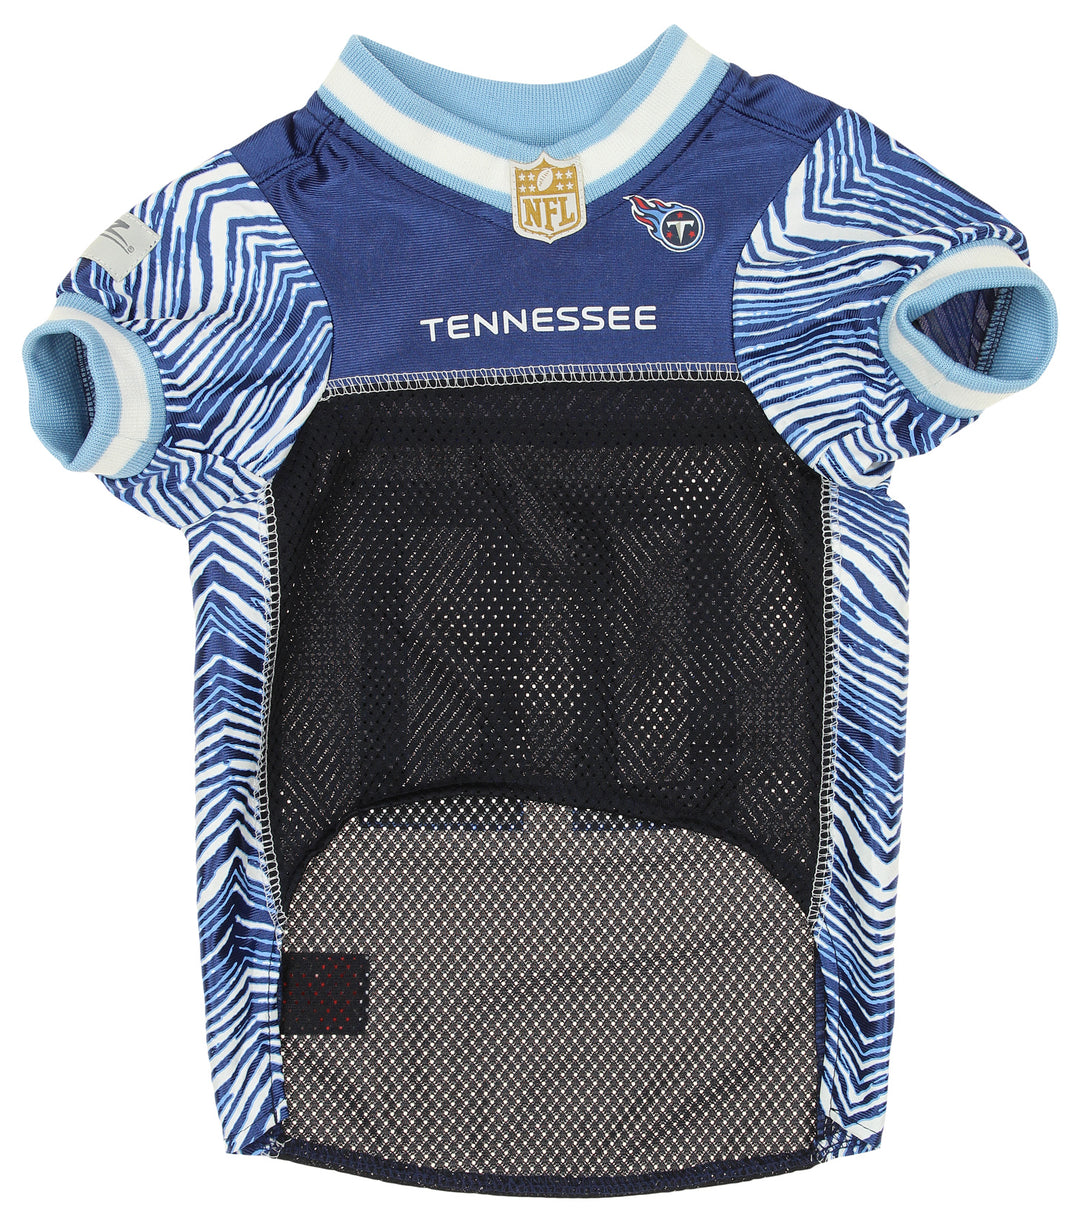 Zubaz X Pets First NFL Tennessee Titans Jersey For Dogs & Cats